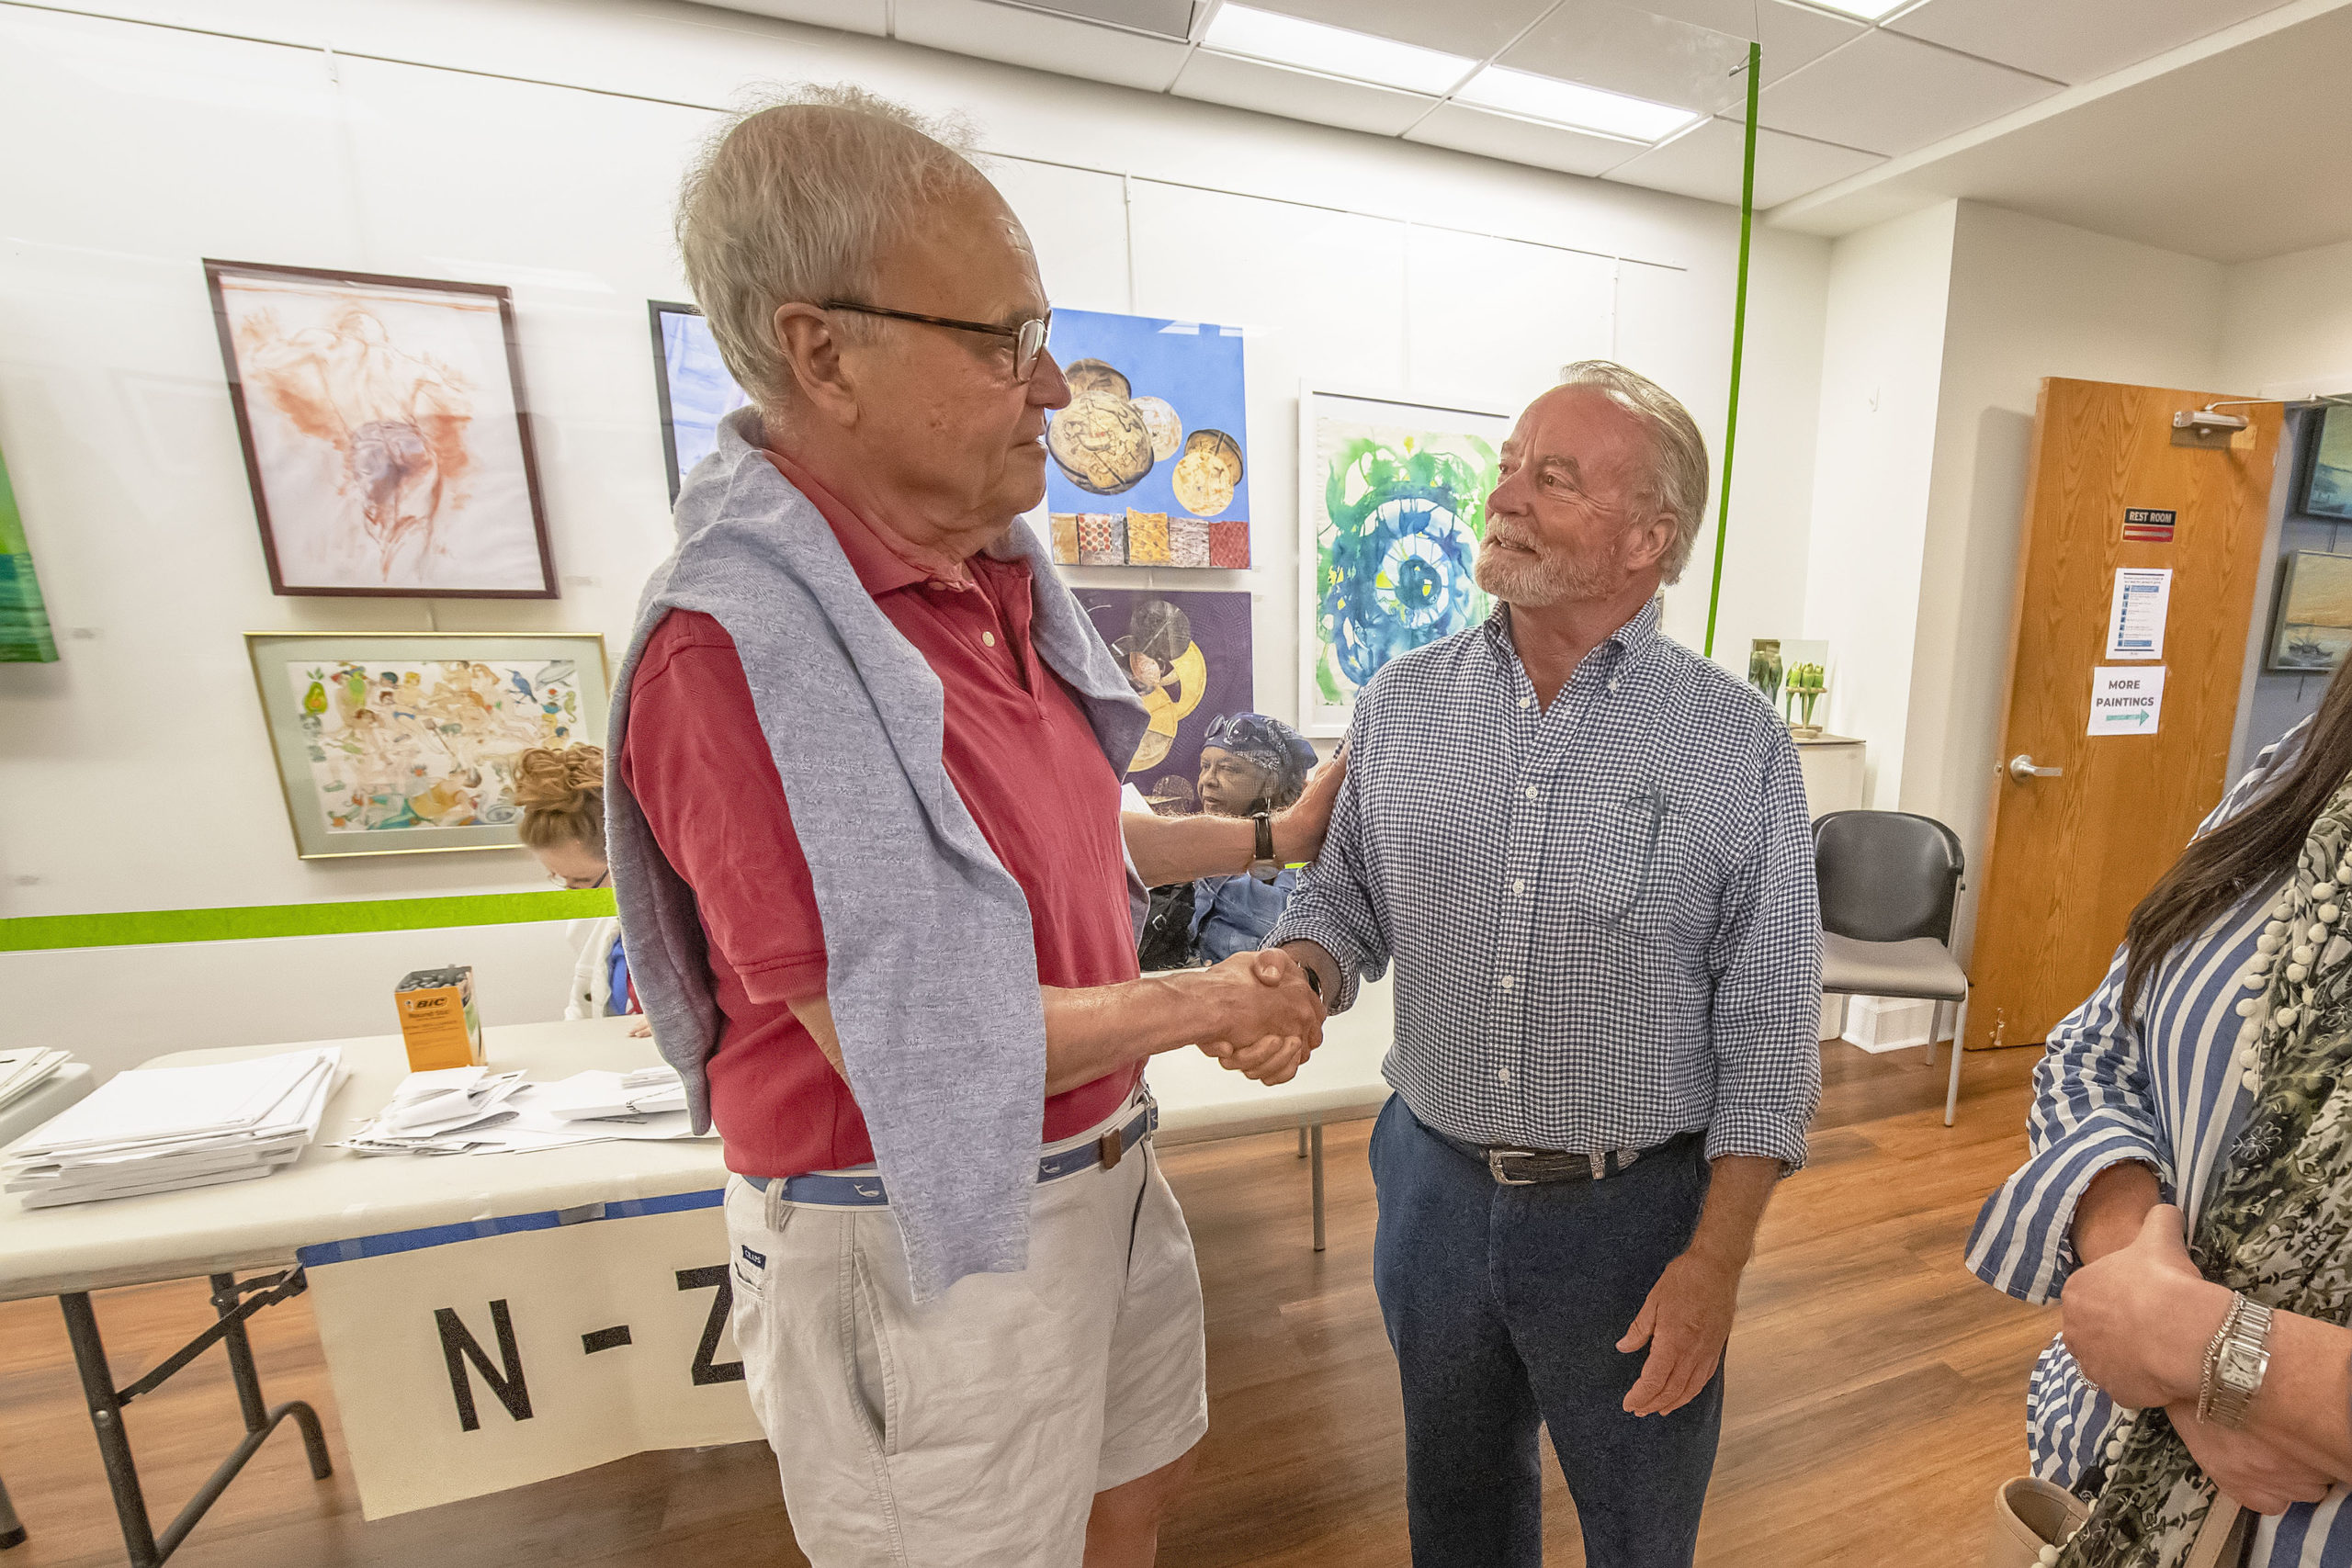 Mayoral candidate Michael Irving gets a handshake from a supporter in spite of his loss following the 2021 Southampton Village Mayoral election at the Southampton Cultural Center on Friday night. MICHAEL HELLER